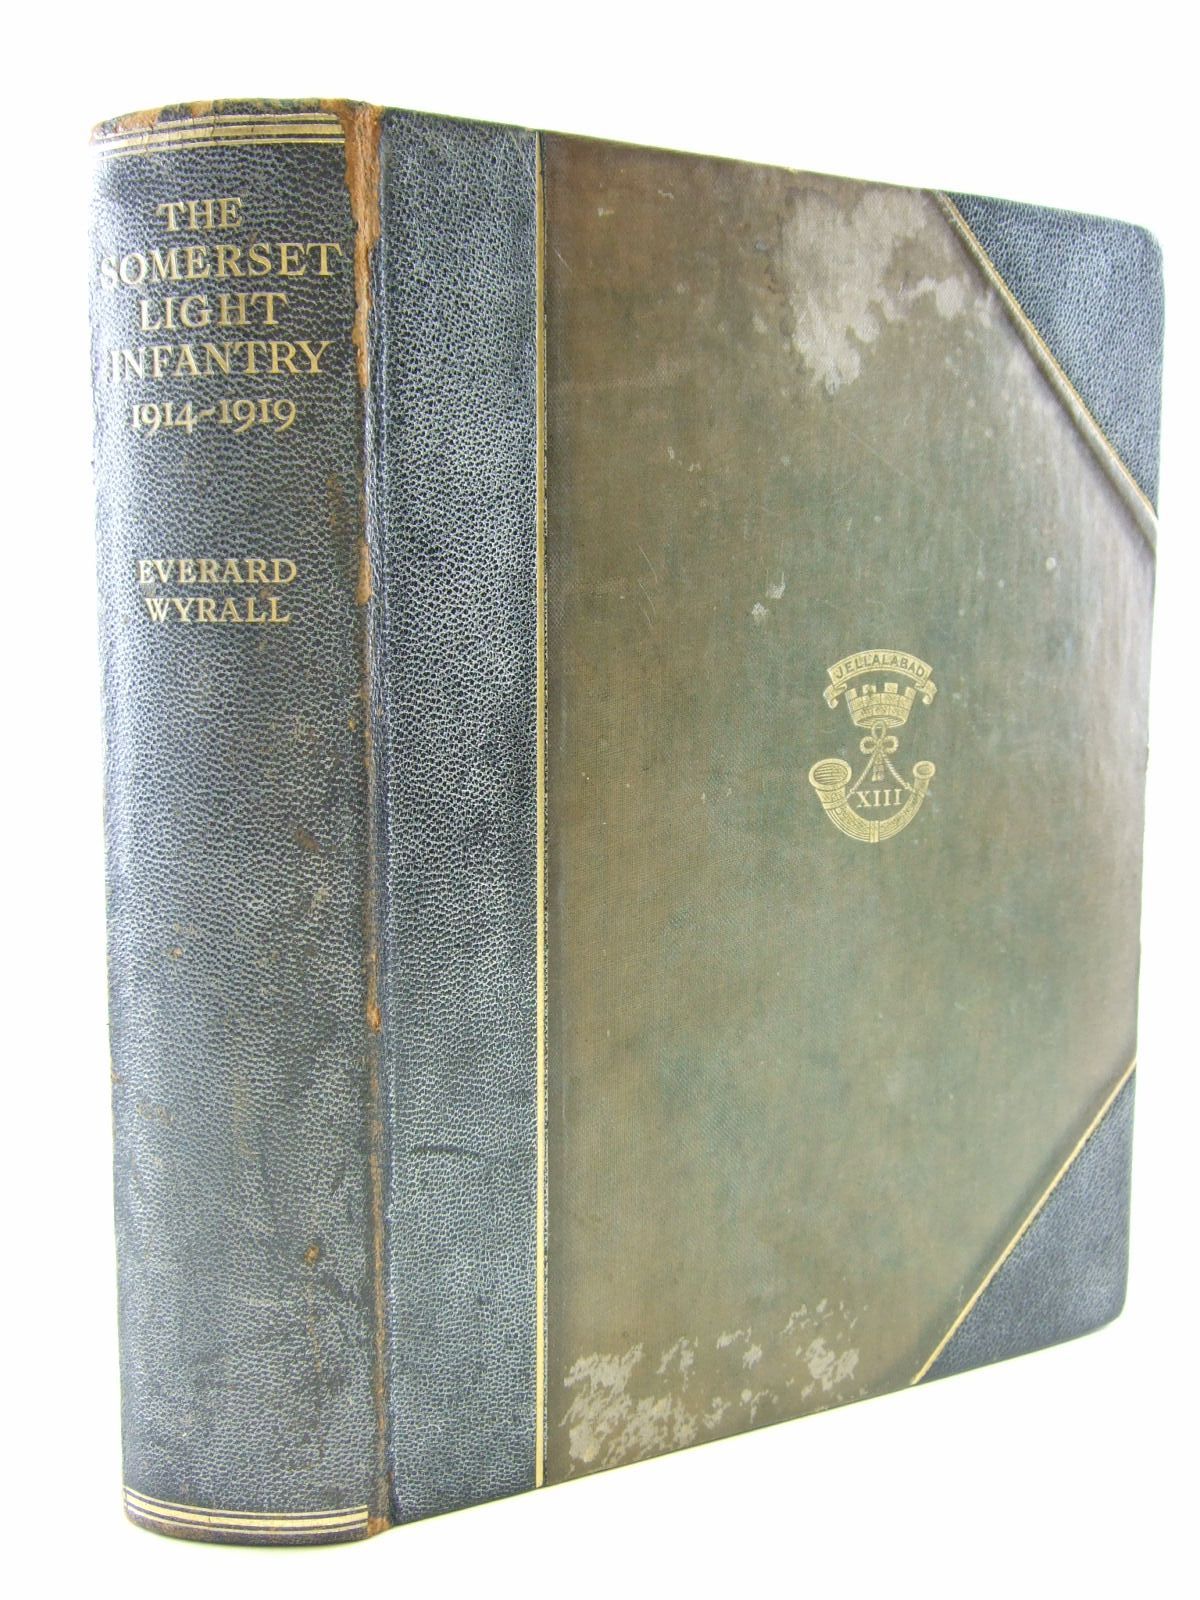 Photo of THE HISTORY OF THE SOMERSET LIGHT INFANTRY (PRINCE ALBERT'S) 1914-1919 written by Wyrall, Everard published by Methuen & Co. Ltd. (STOCK CODE: 2109024)  for sale by Stella & Rose's Books